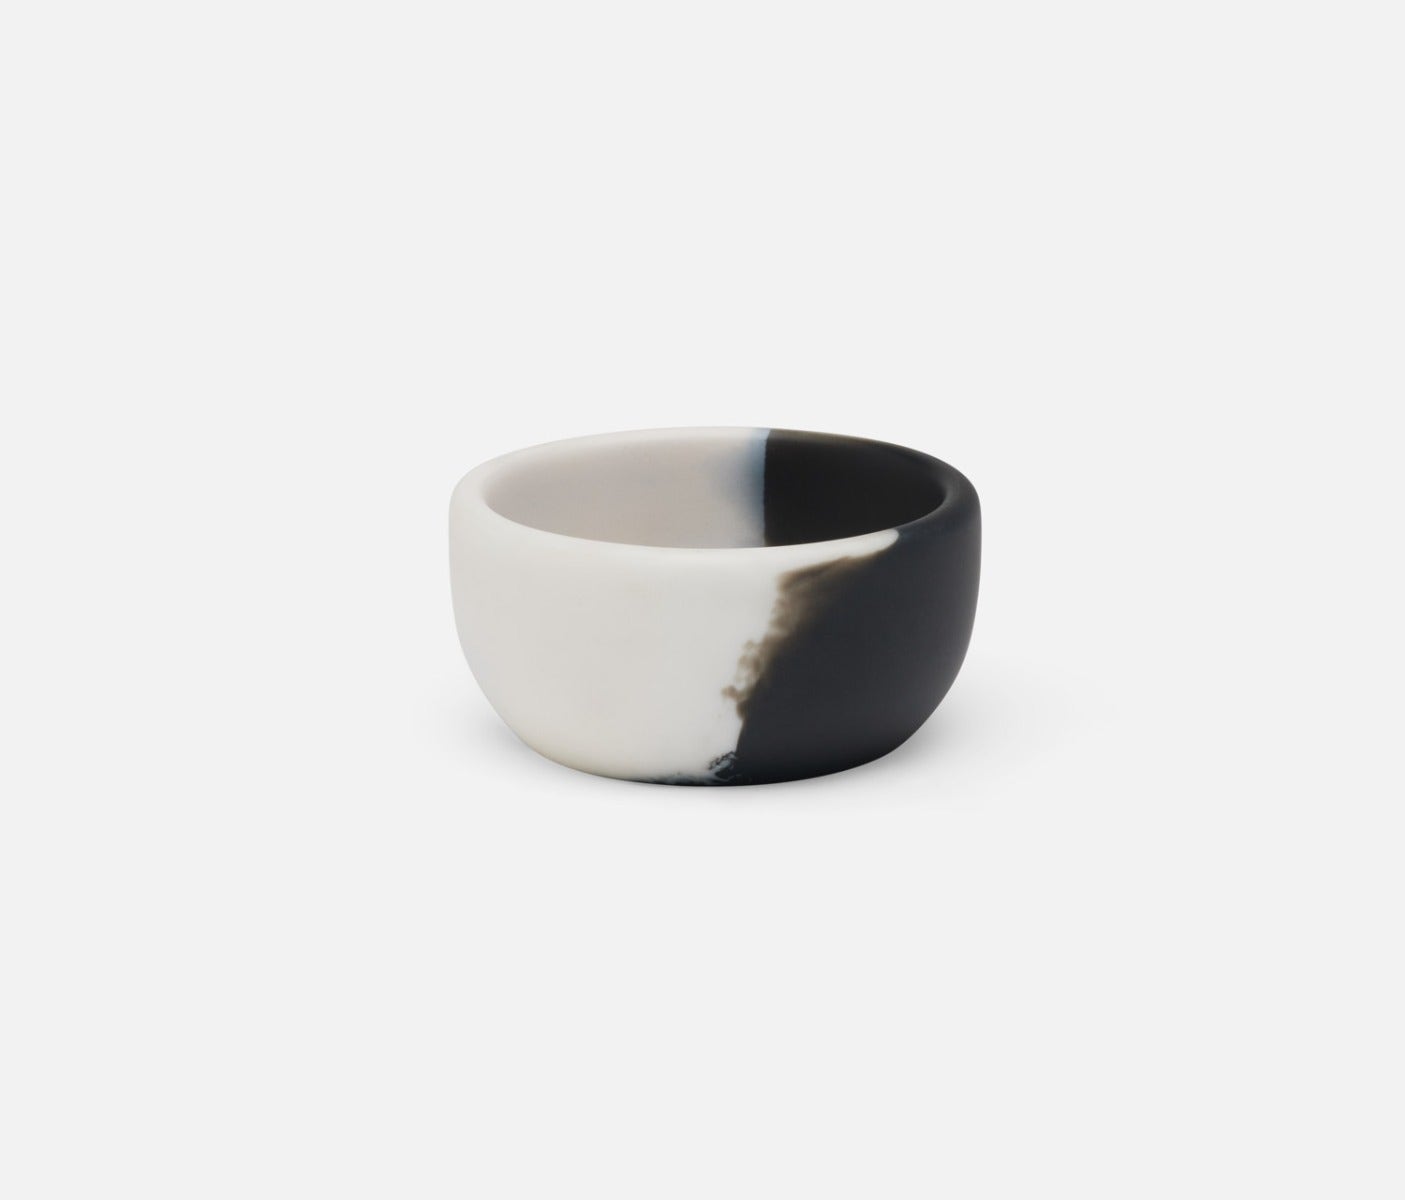 MAXTON LARGE PINCH BOWL IN BLACK AND WHITE